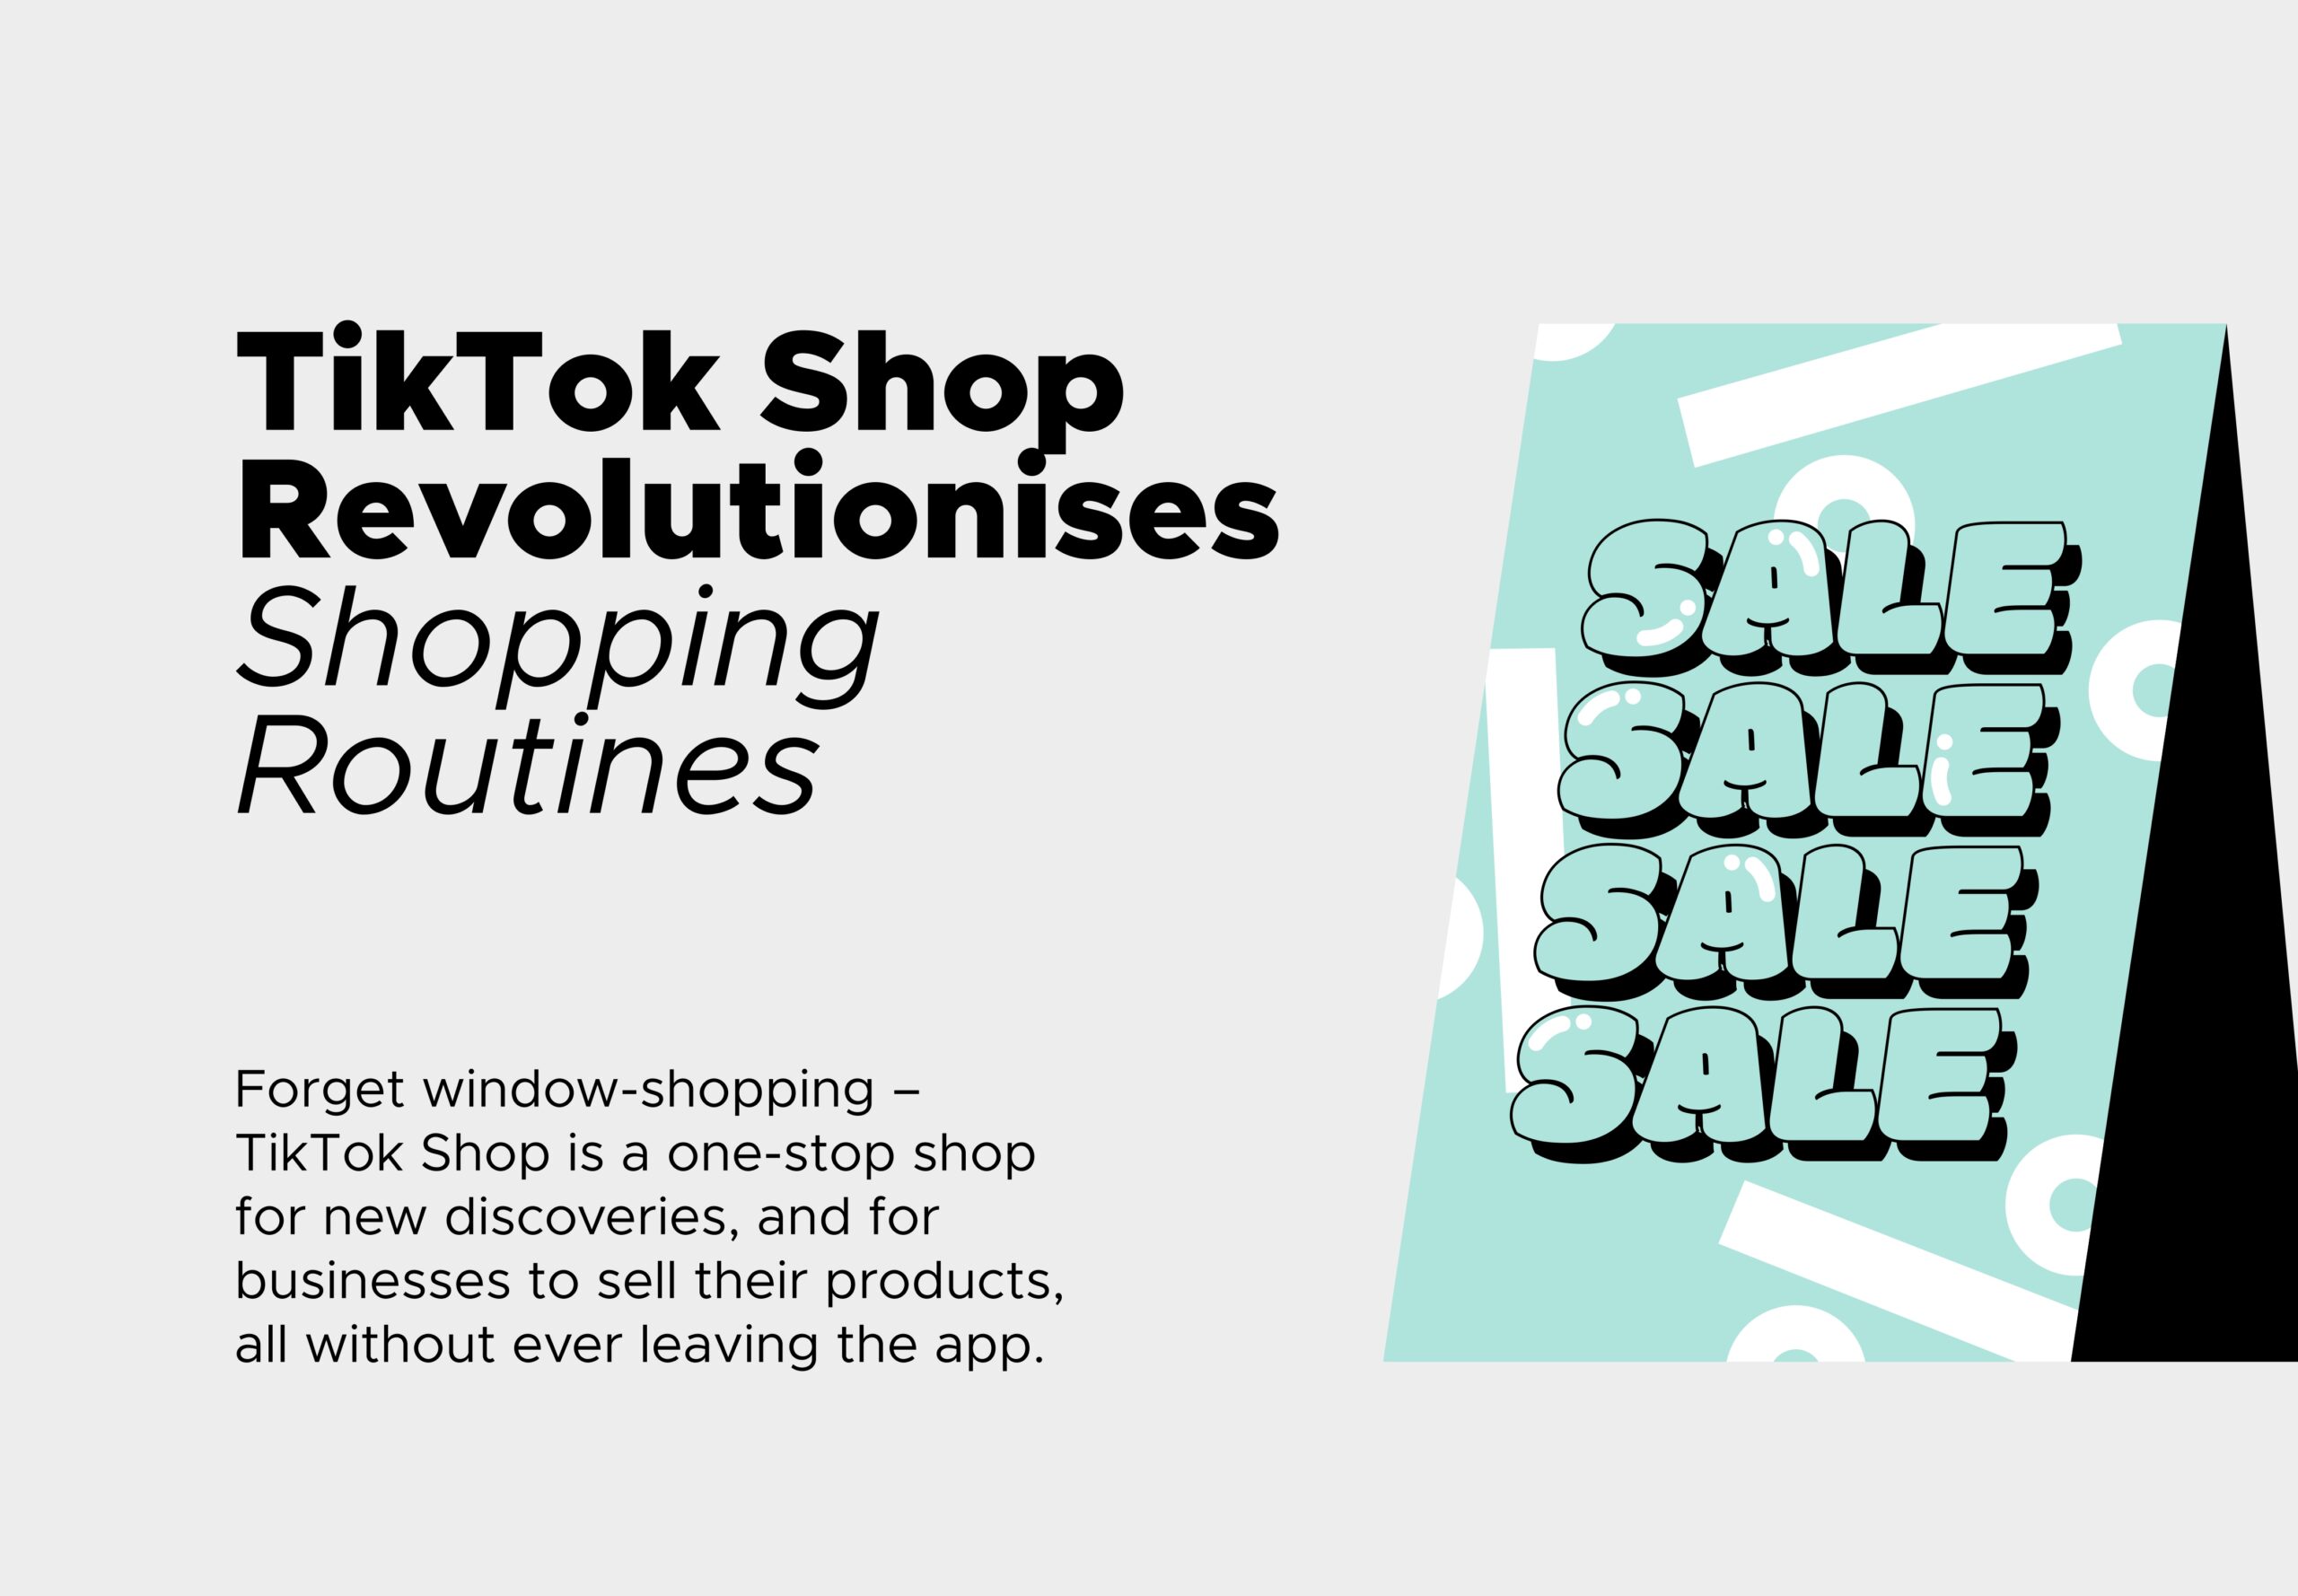 A grey background with a big turquoise sign saying "sale" and the headline "TikTok Shop Revolutionises Shopping Routines"